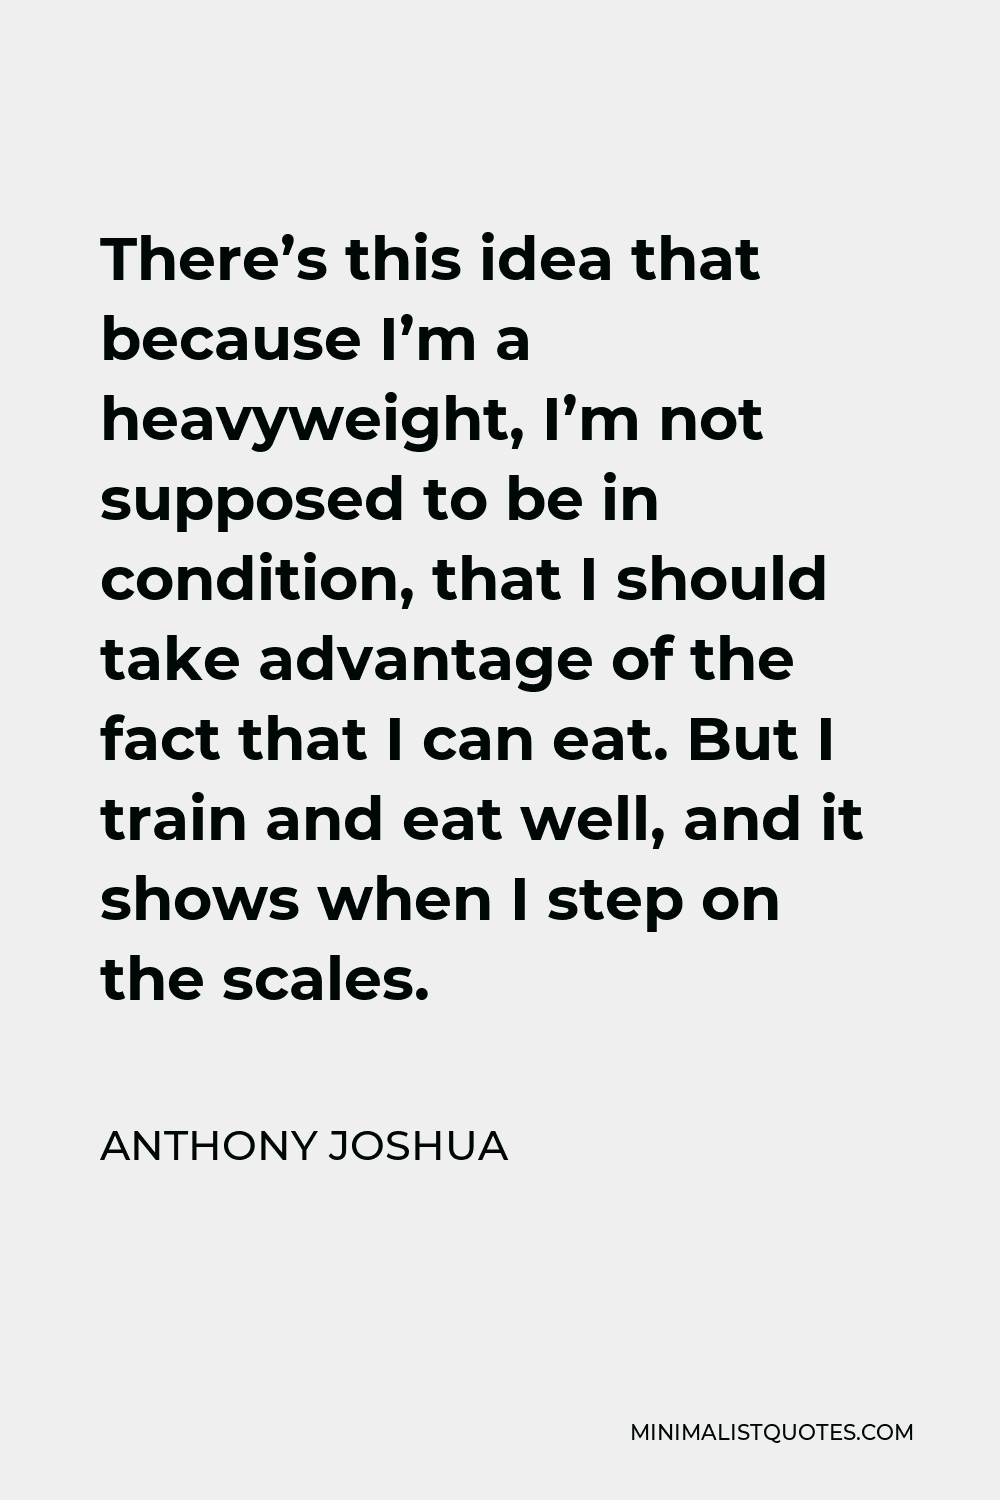 Anthony Joshua Quote - There’s this idea that because I’m a heavyweight, I’m not supposed to be in condition, that I should take advantage of the fact that I can eat. But I train and eat well, and it shows when I step on the scales.